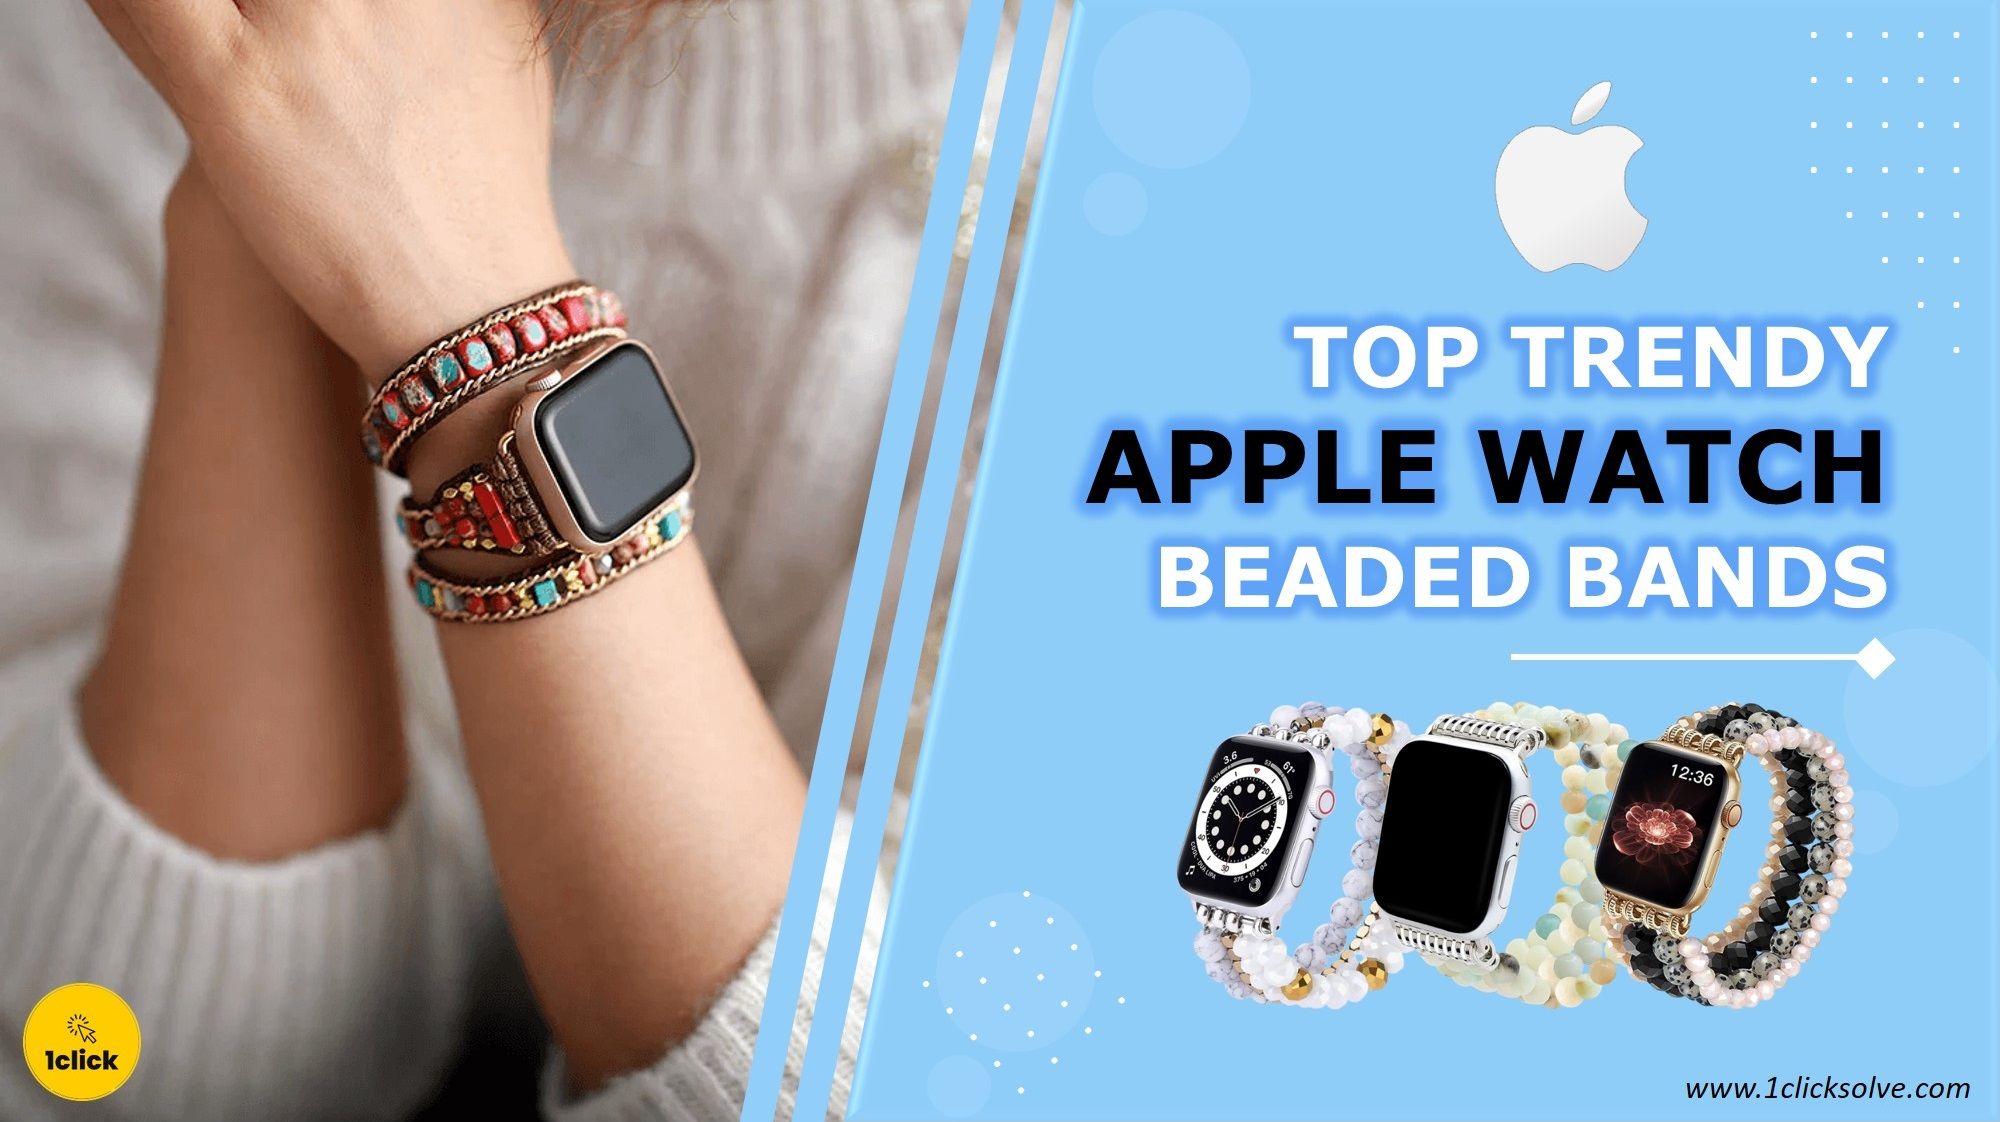 Get Noticed with These Top 10 Trendy Apple Watch Beaded Bands